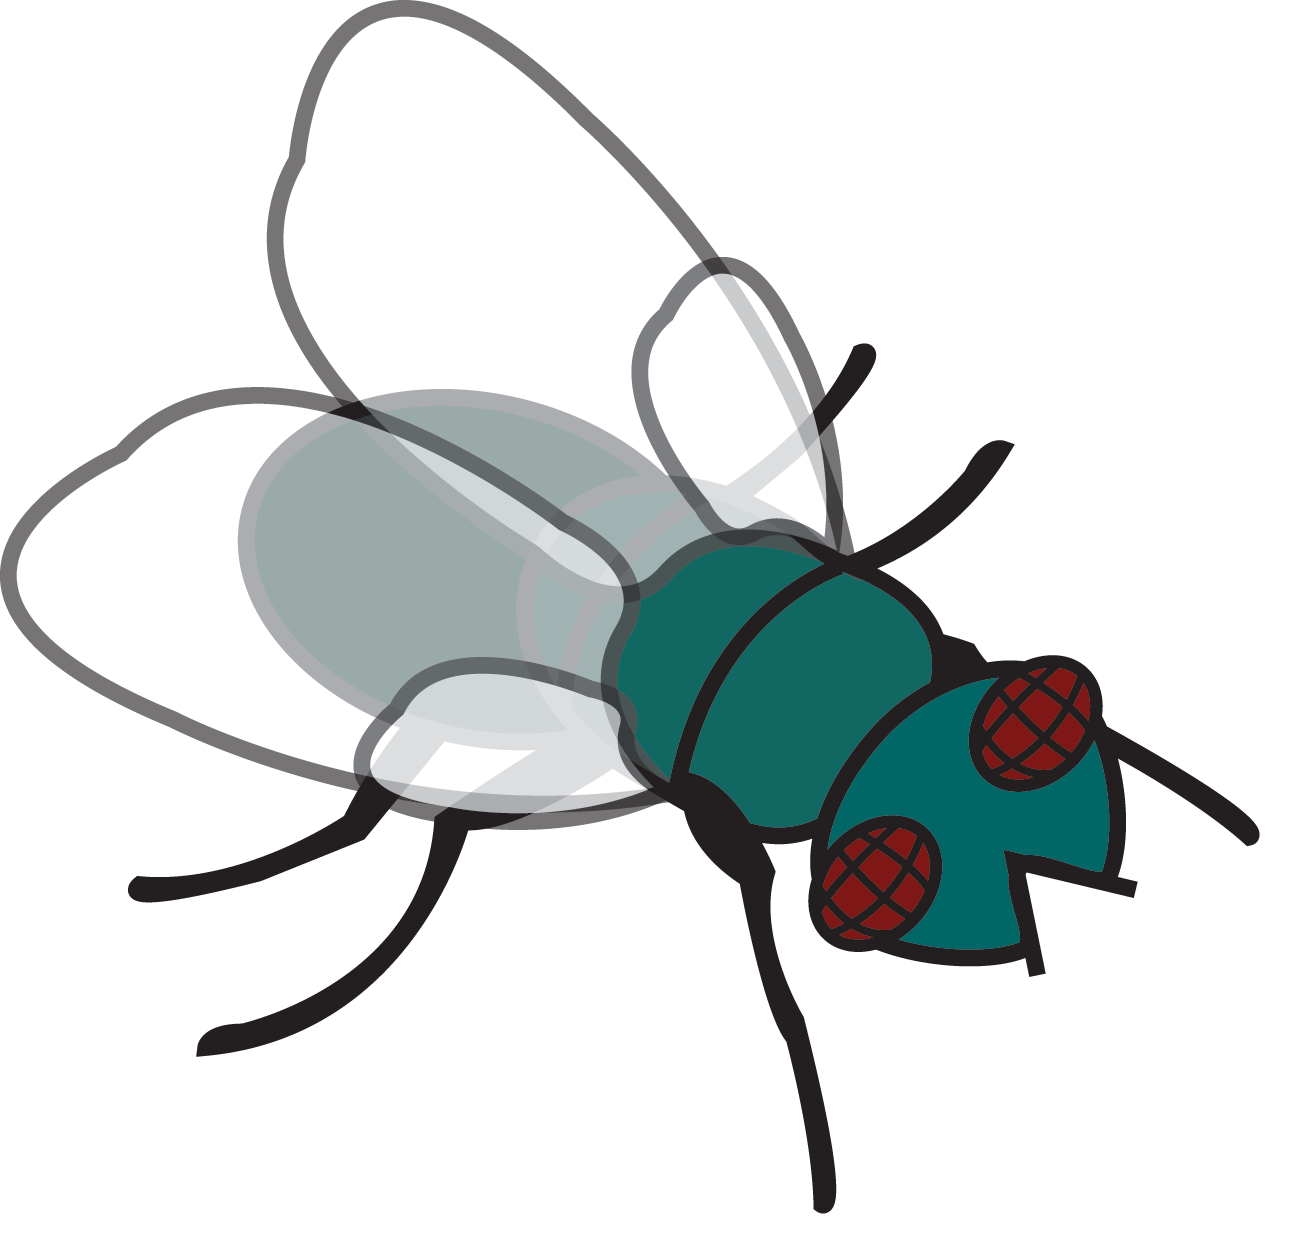 Clipart images of a fly